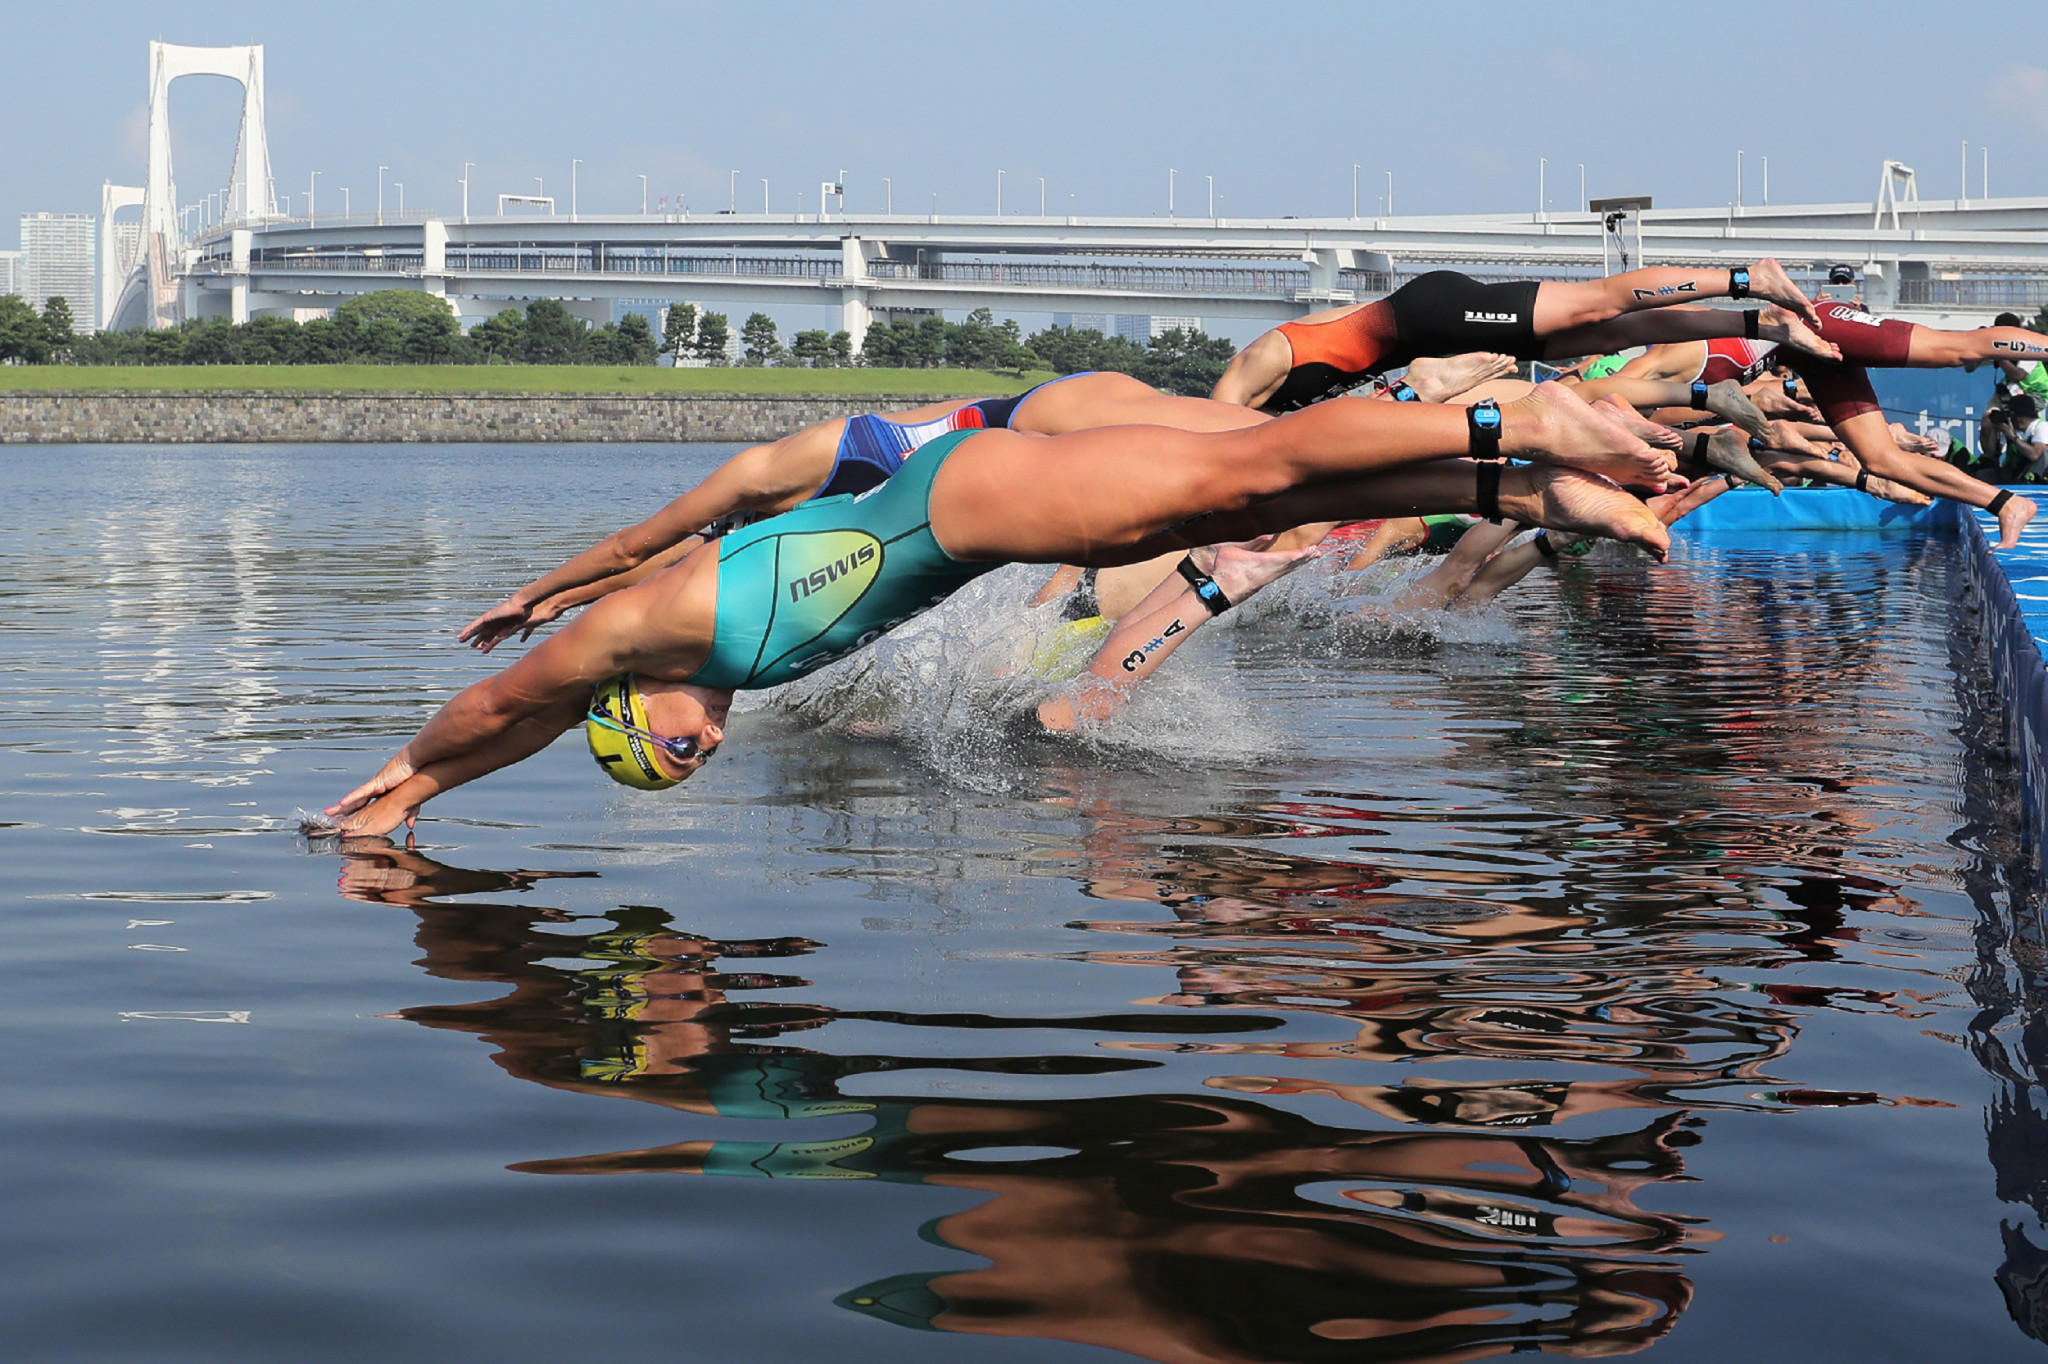 The Tokyo 2020 triathlon test event took place in high temperatures ©Getty Images